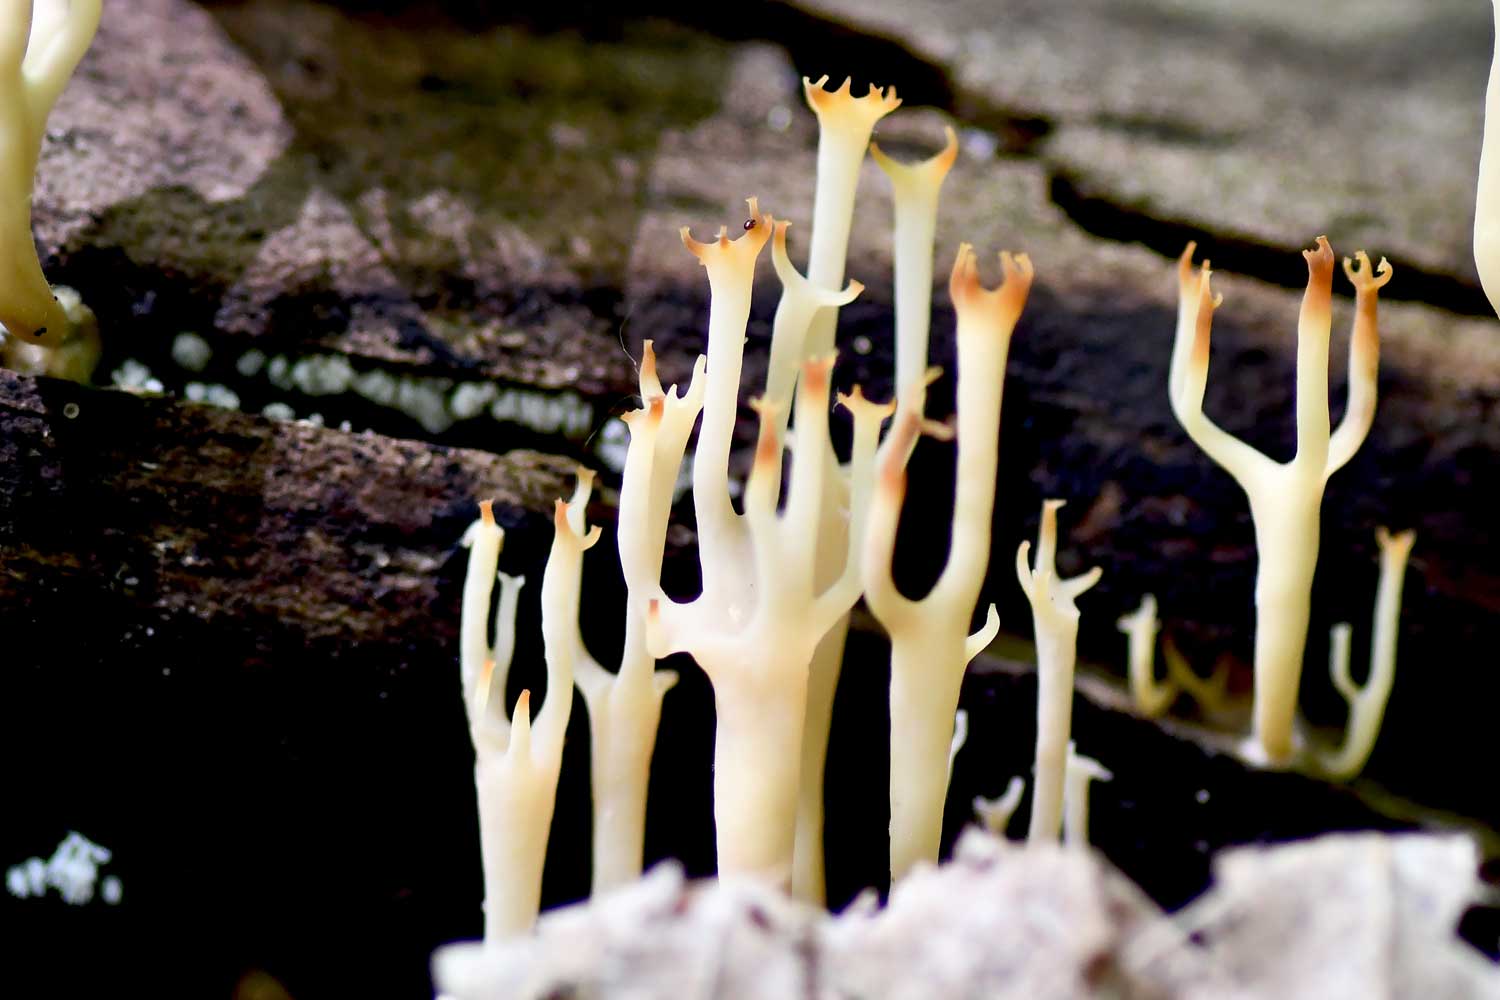 Crown tipped coral fungus on a log.